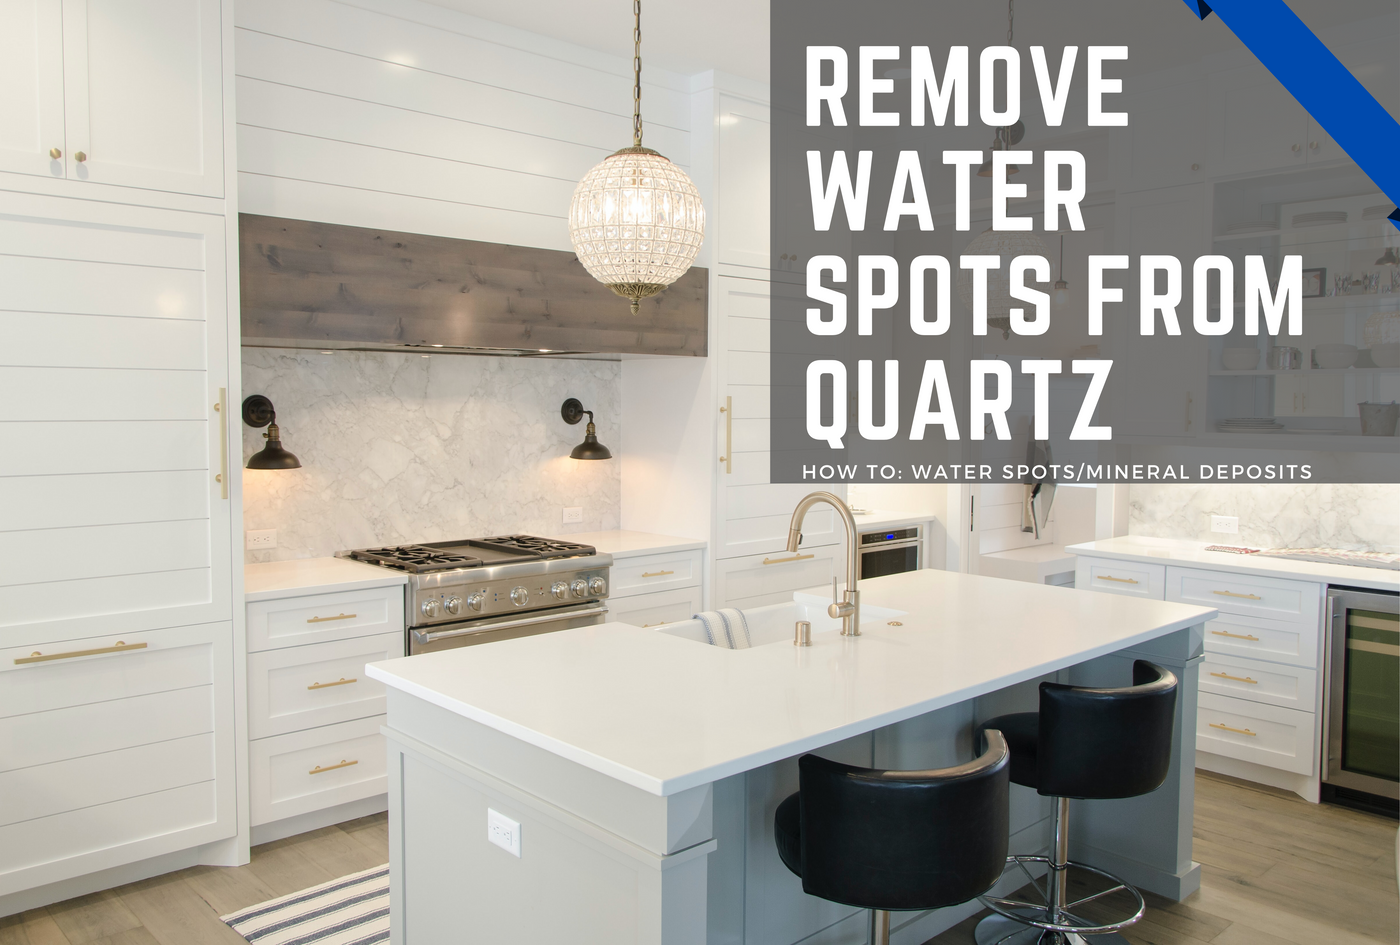 How to Safely Remove Water Spots from Quartz Countertops